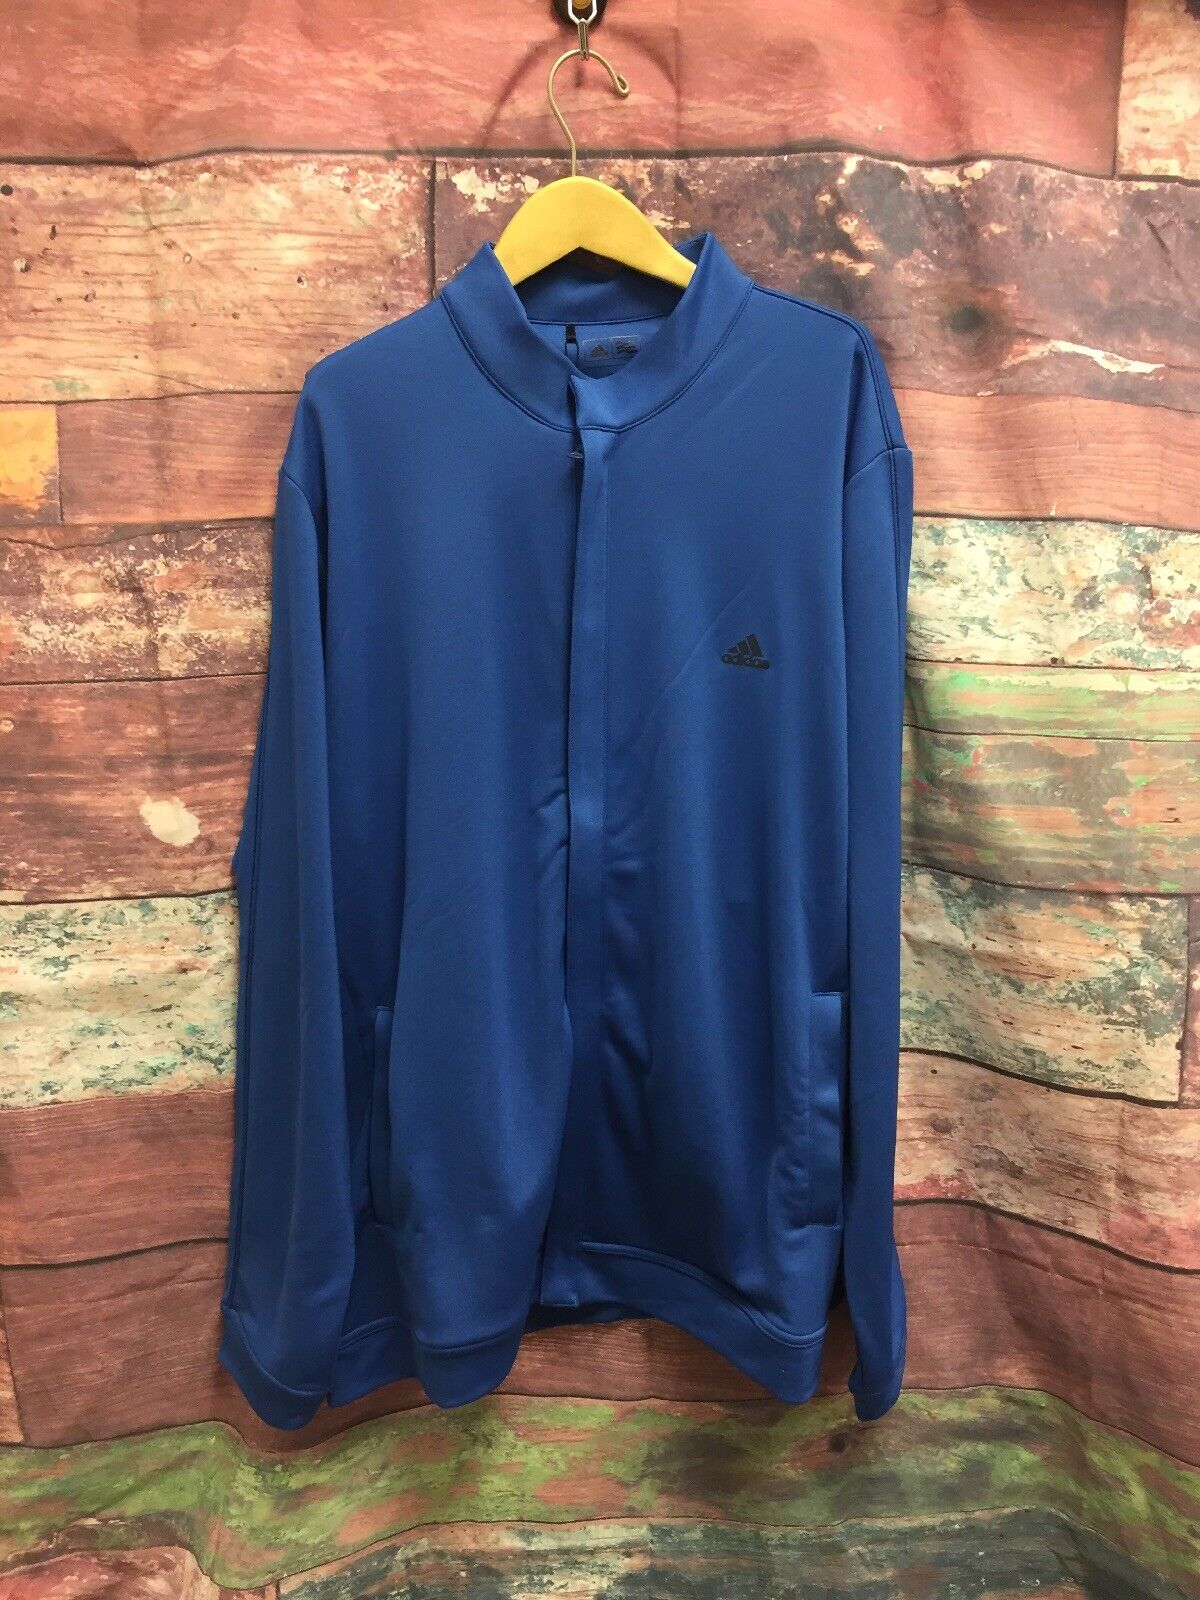 NEW Adidas Climalite Full Zip Pullover Men's Size XL